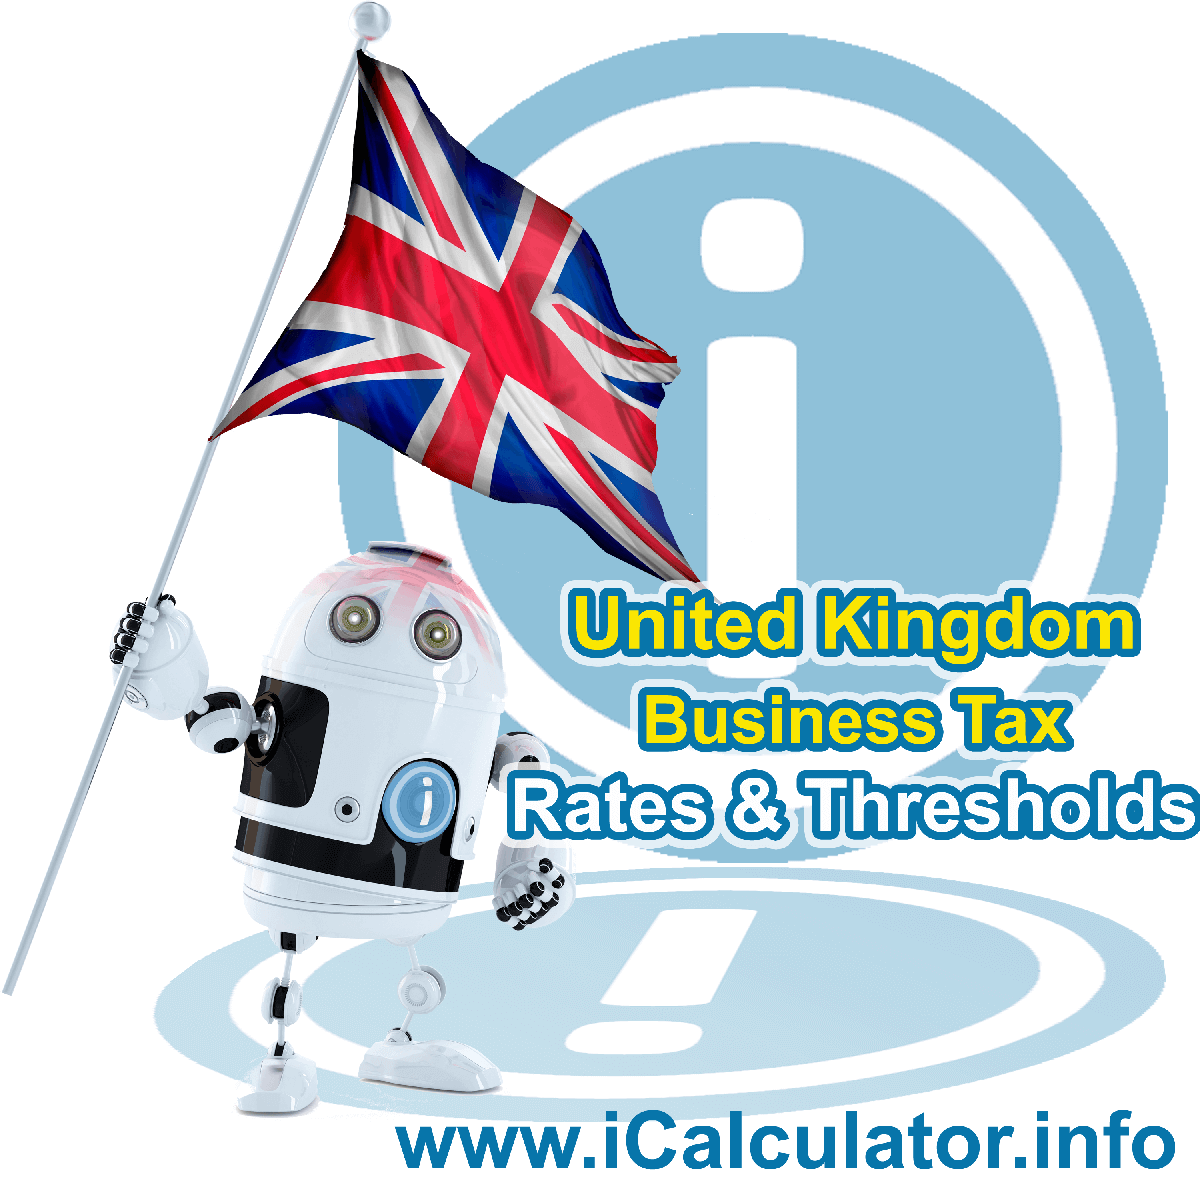 United Kingdom Corporation Tax Rates in 2020. This image shows the United Kingdom flag and information relating to the corporation tax formula for the United Kingdom Corporation Tax Calculator in 2020